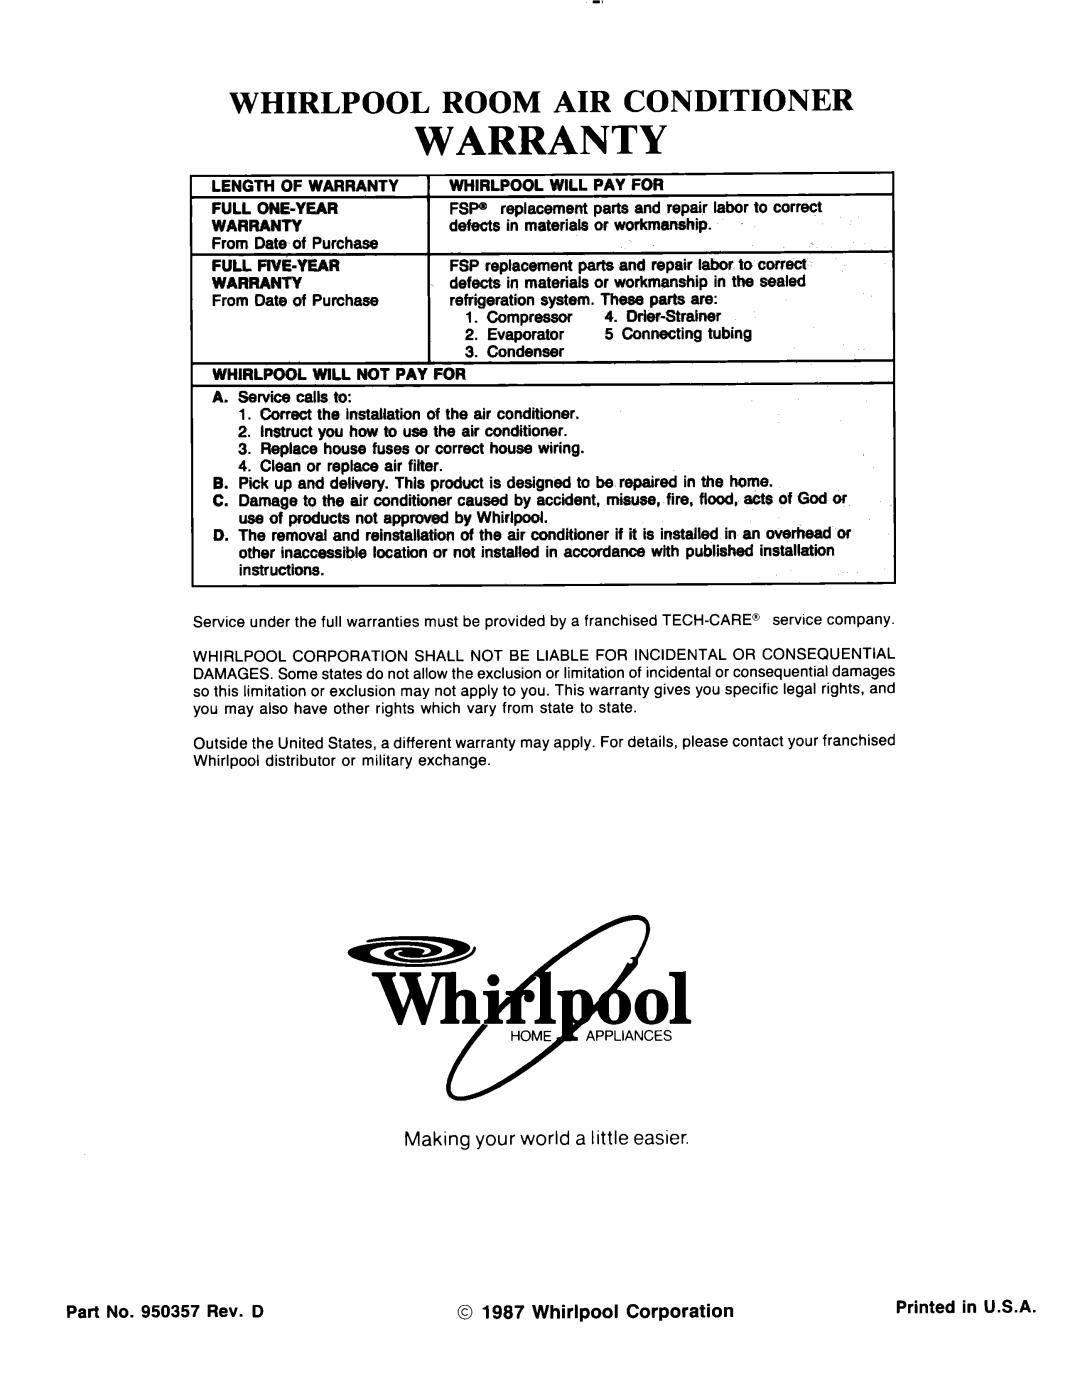 Whirlpool ACE184XM0 manual Room, Making your world a little easier, Warranty, Whirlpool, Conditioner 